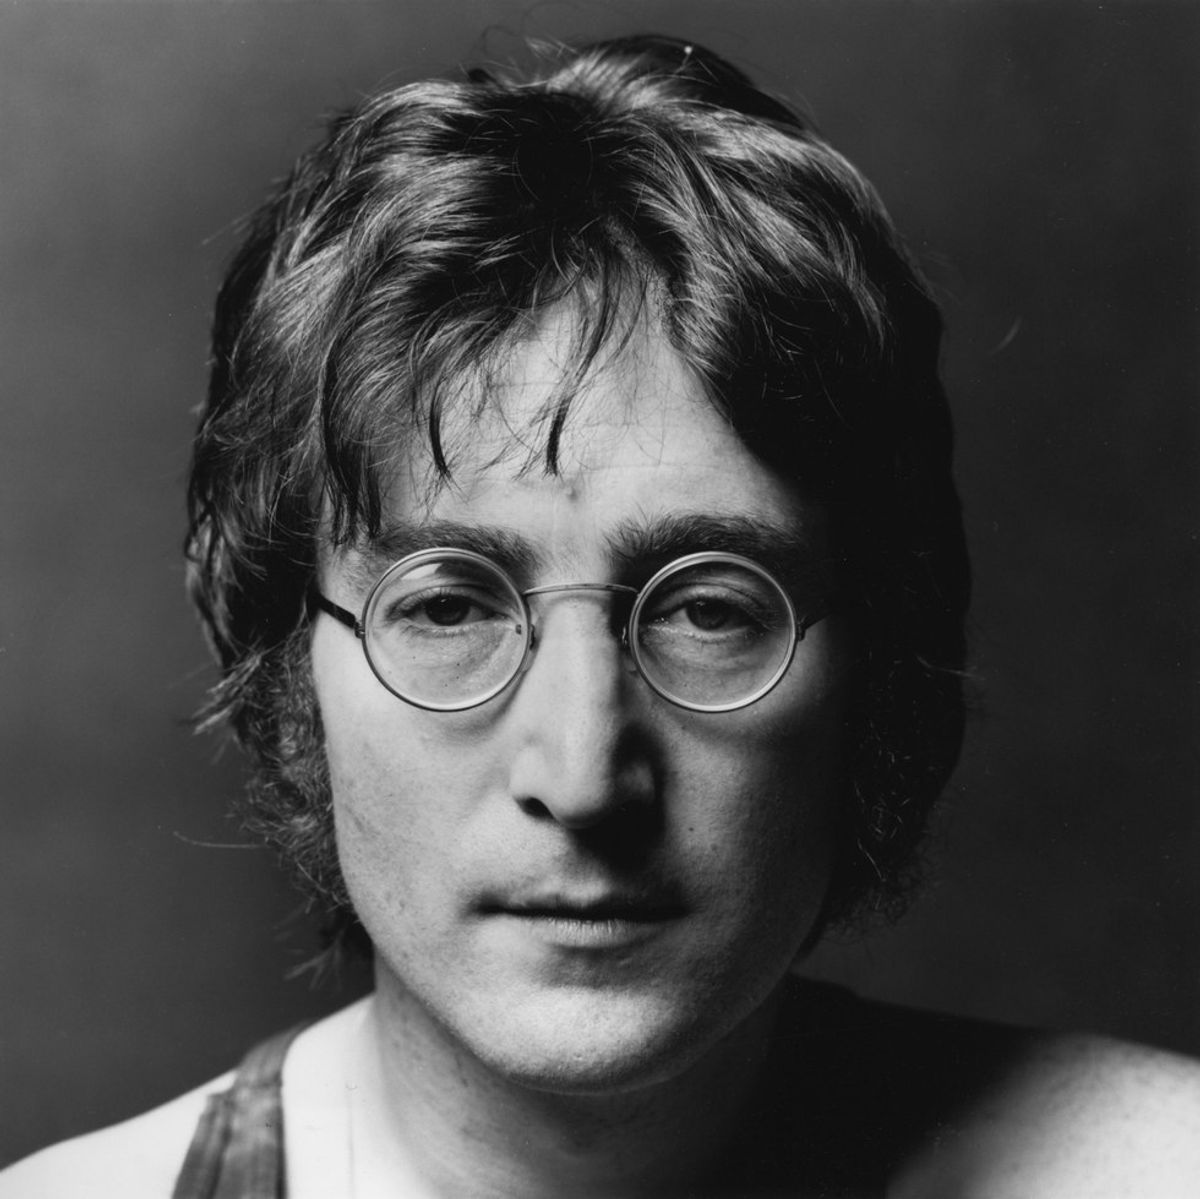 A Brief Reflection On The Influence Of John Lennon